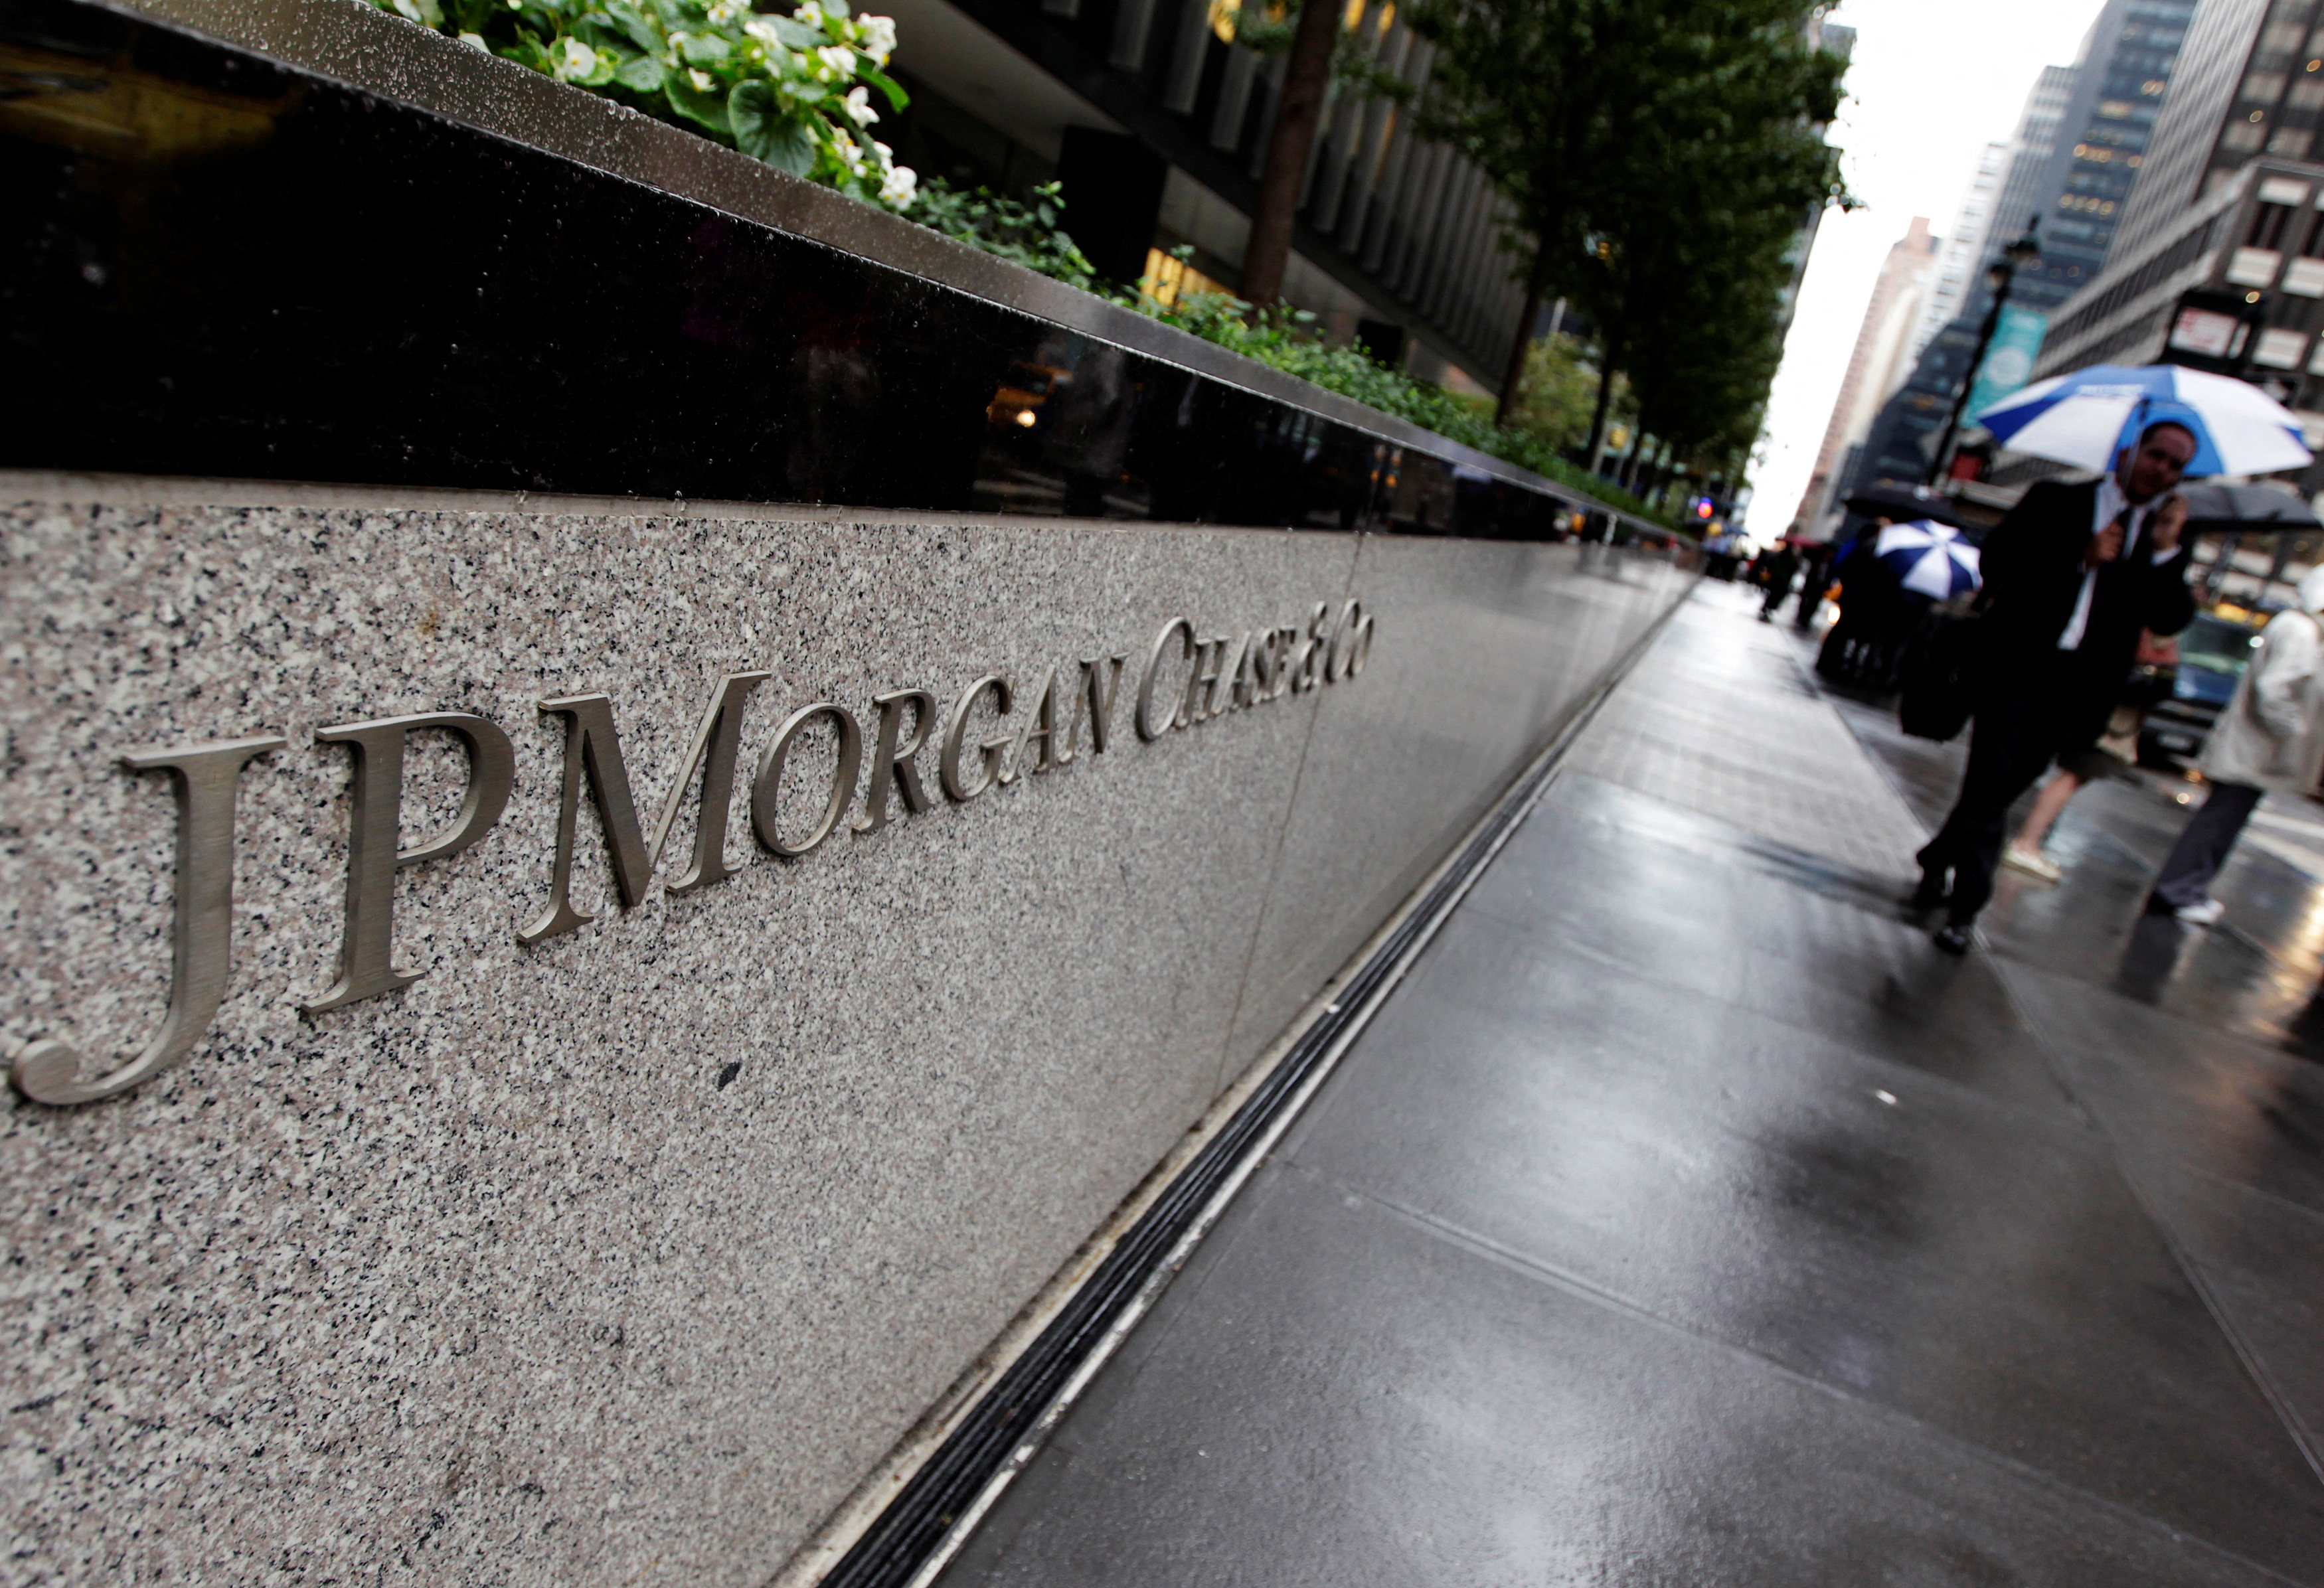 The entrance to JPMorgan Chase's international headquarters on Park Avenue is seen in New York